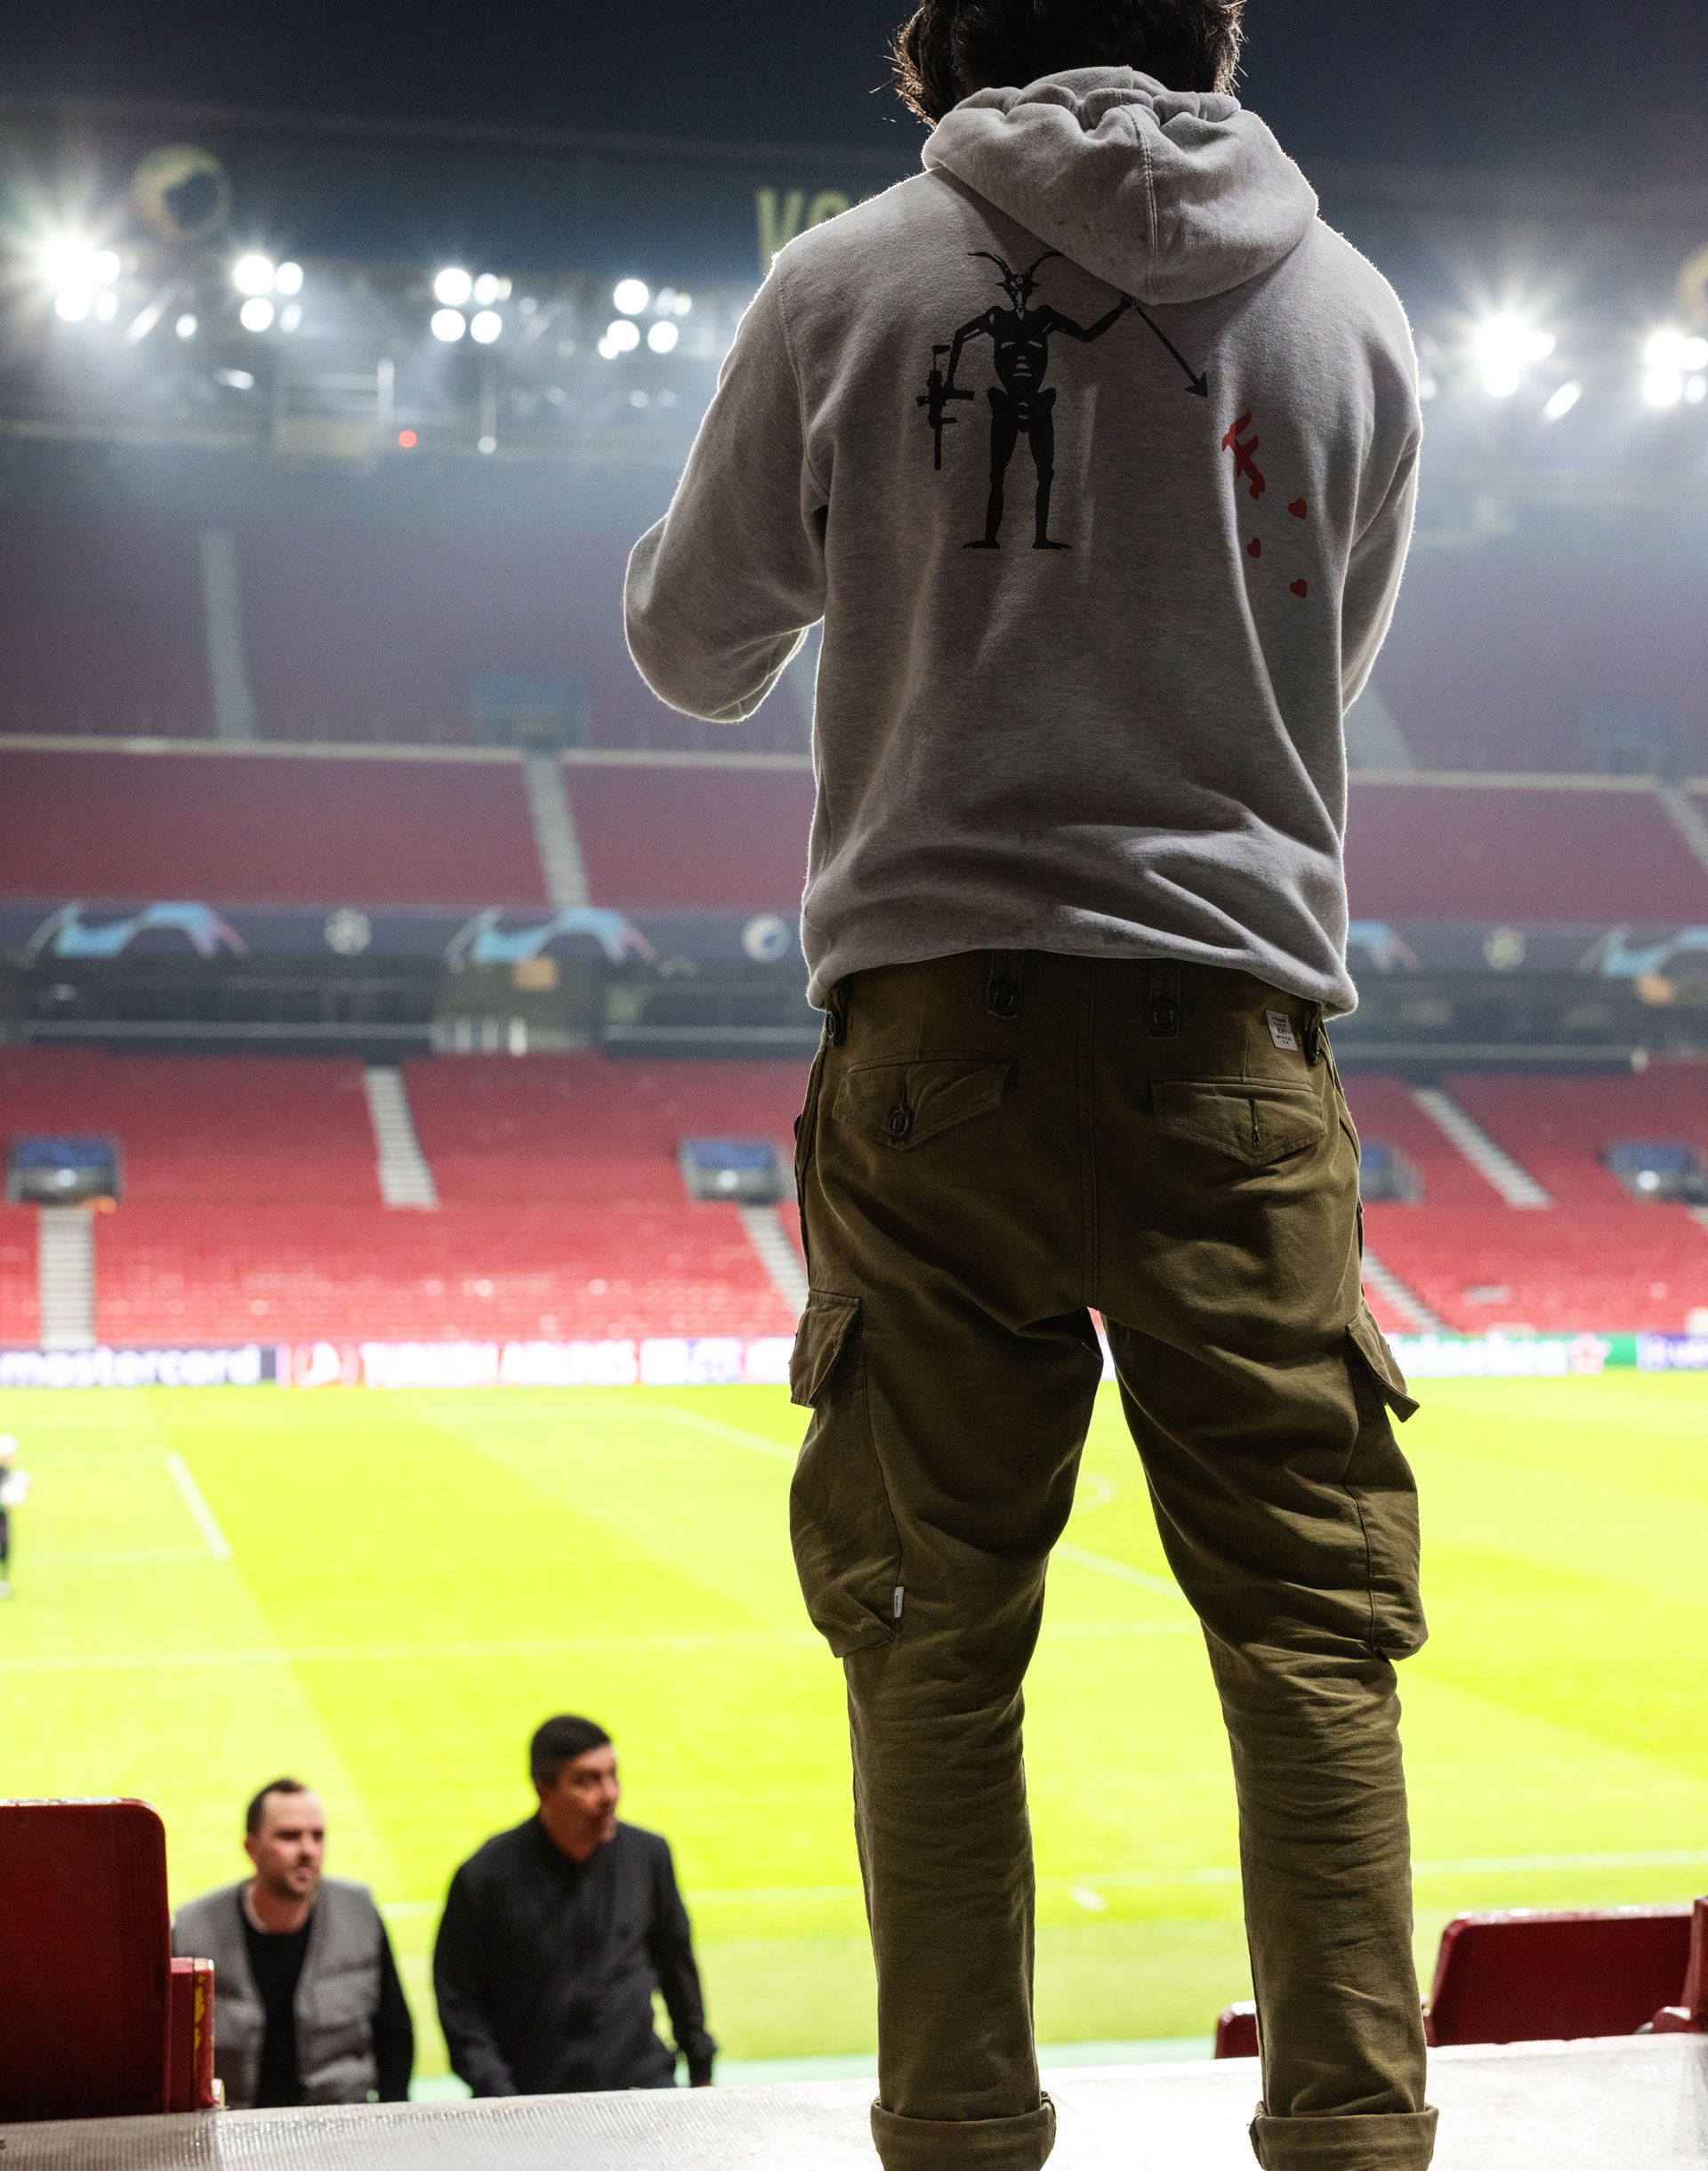 Man standing in stadium with back to camera looking down